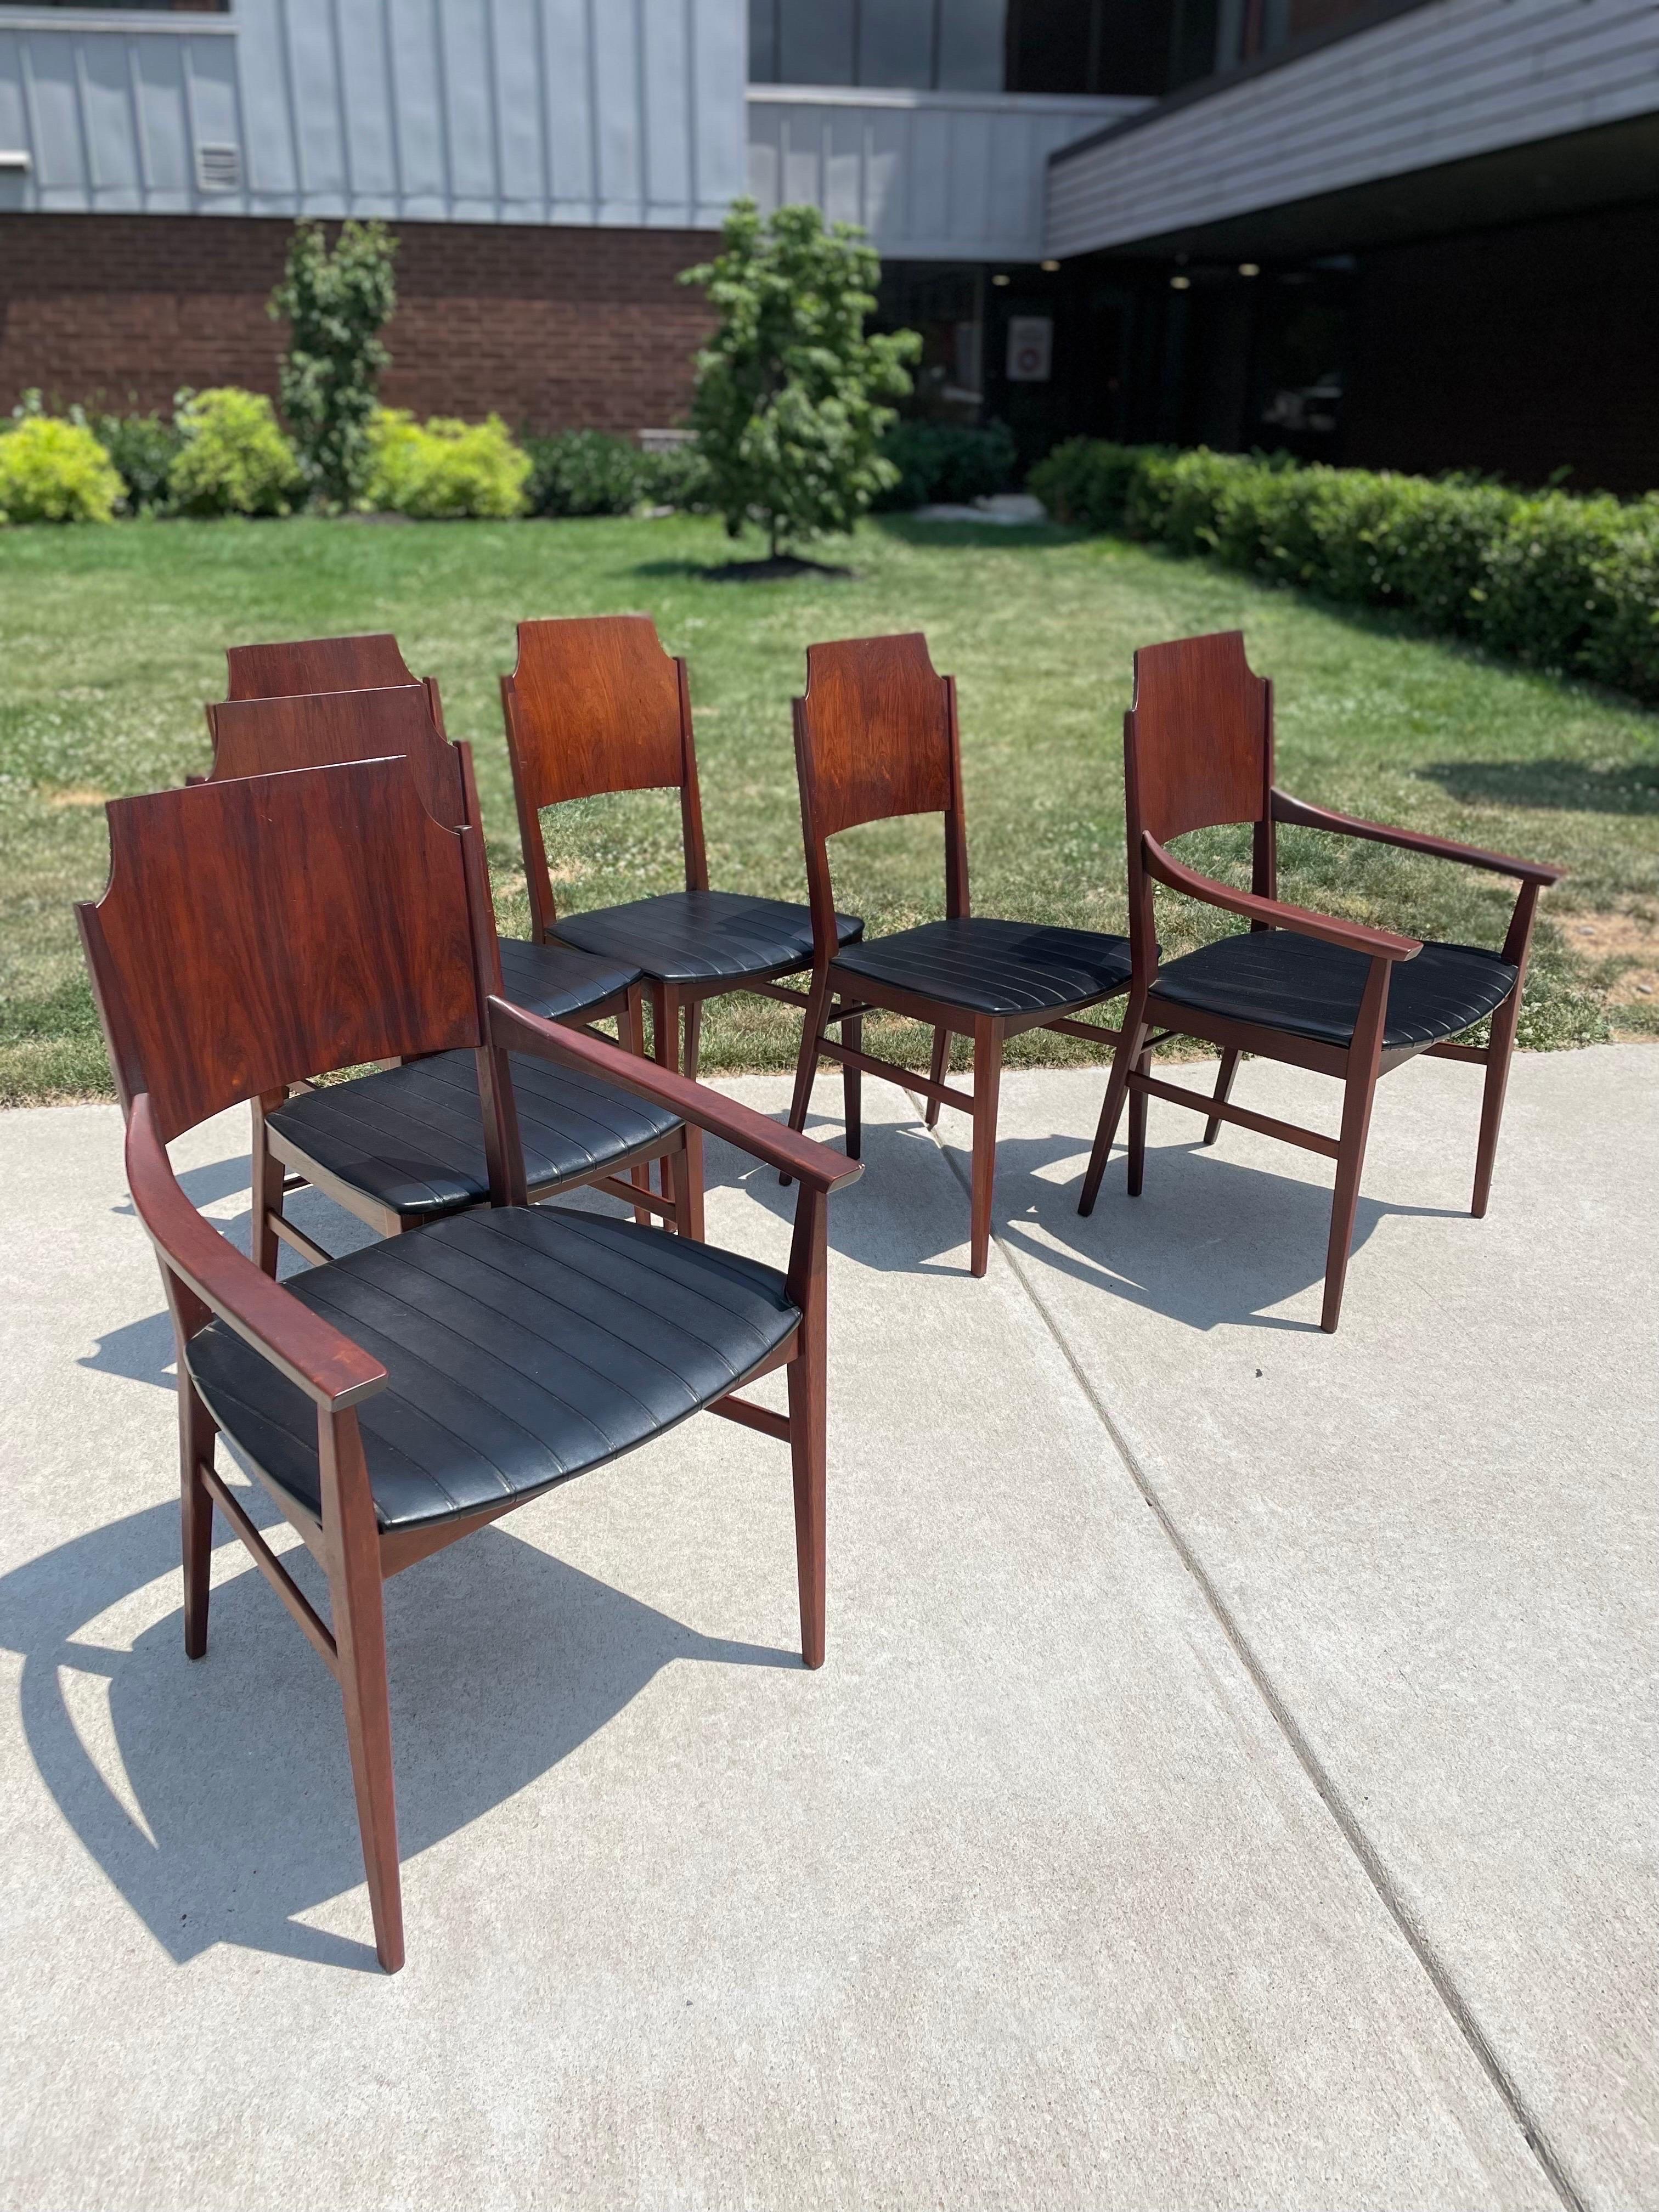 Vintage MCM Paul McCobb Delineator for Lane Furniture dining table set with 2 armed chairs and 4 armless chairs.